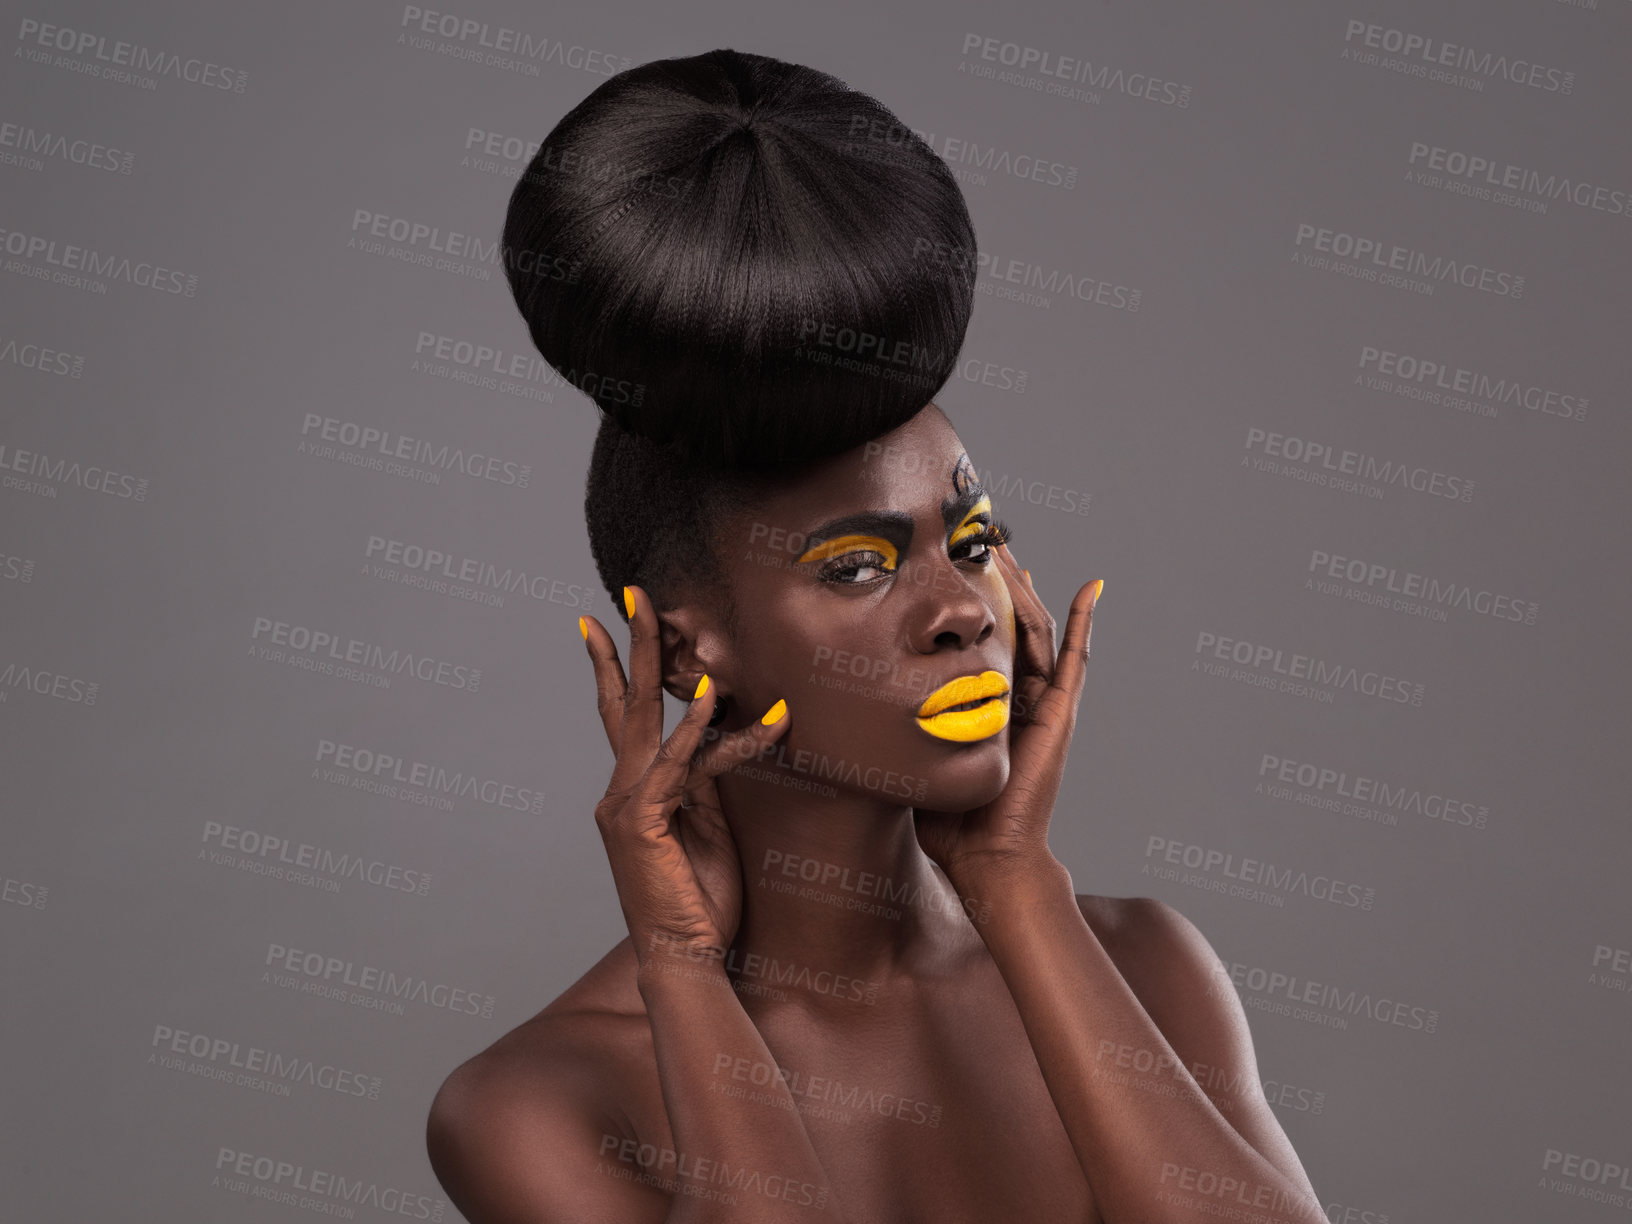 Buy stock photo Makeup and portrait of black woman in studio with lipstick, cosmetics and eyeshadow on gray background. Beauty, aesthetic and female model with yellow lip balm, nail polish manicure and glamour